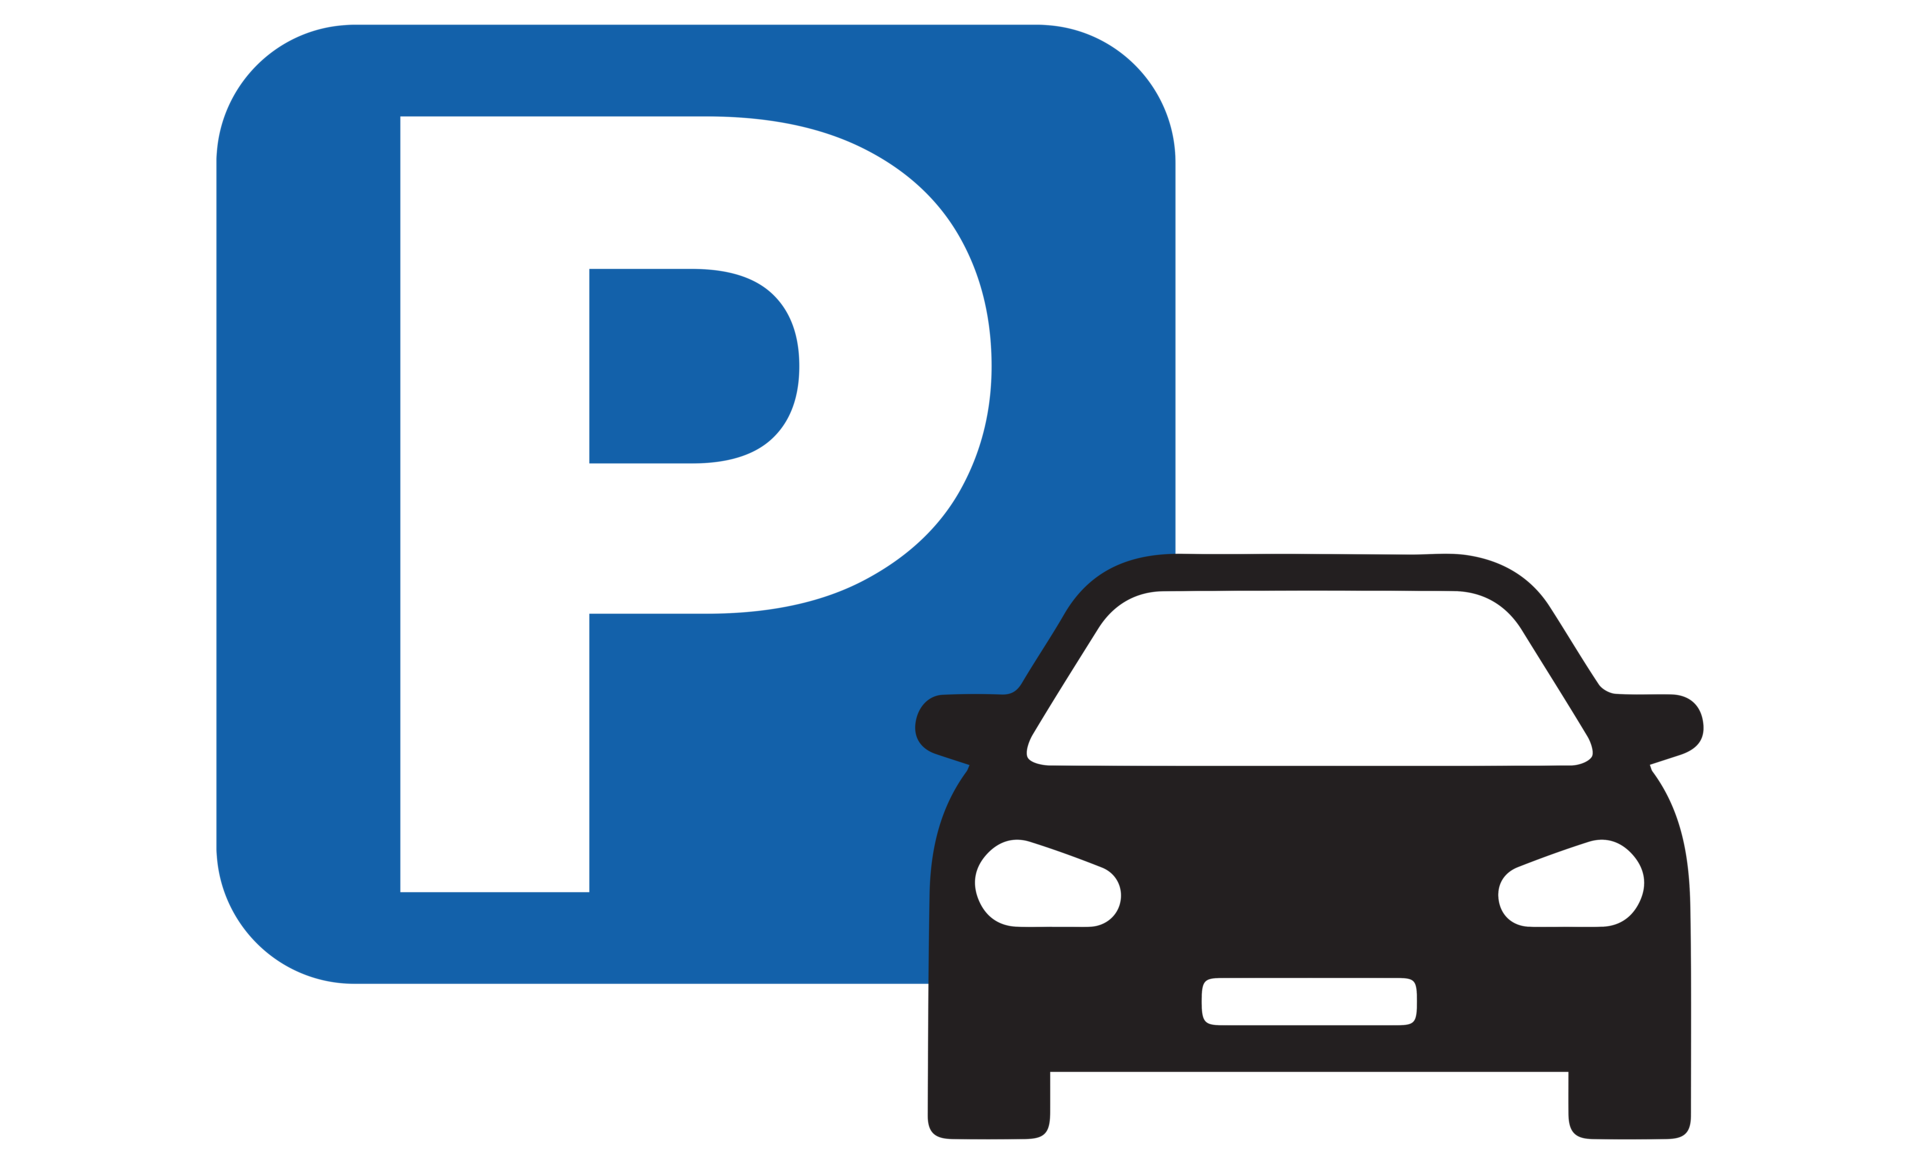 Home - Parking Awareness Services - Business Sustainable ANPR Enforcement